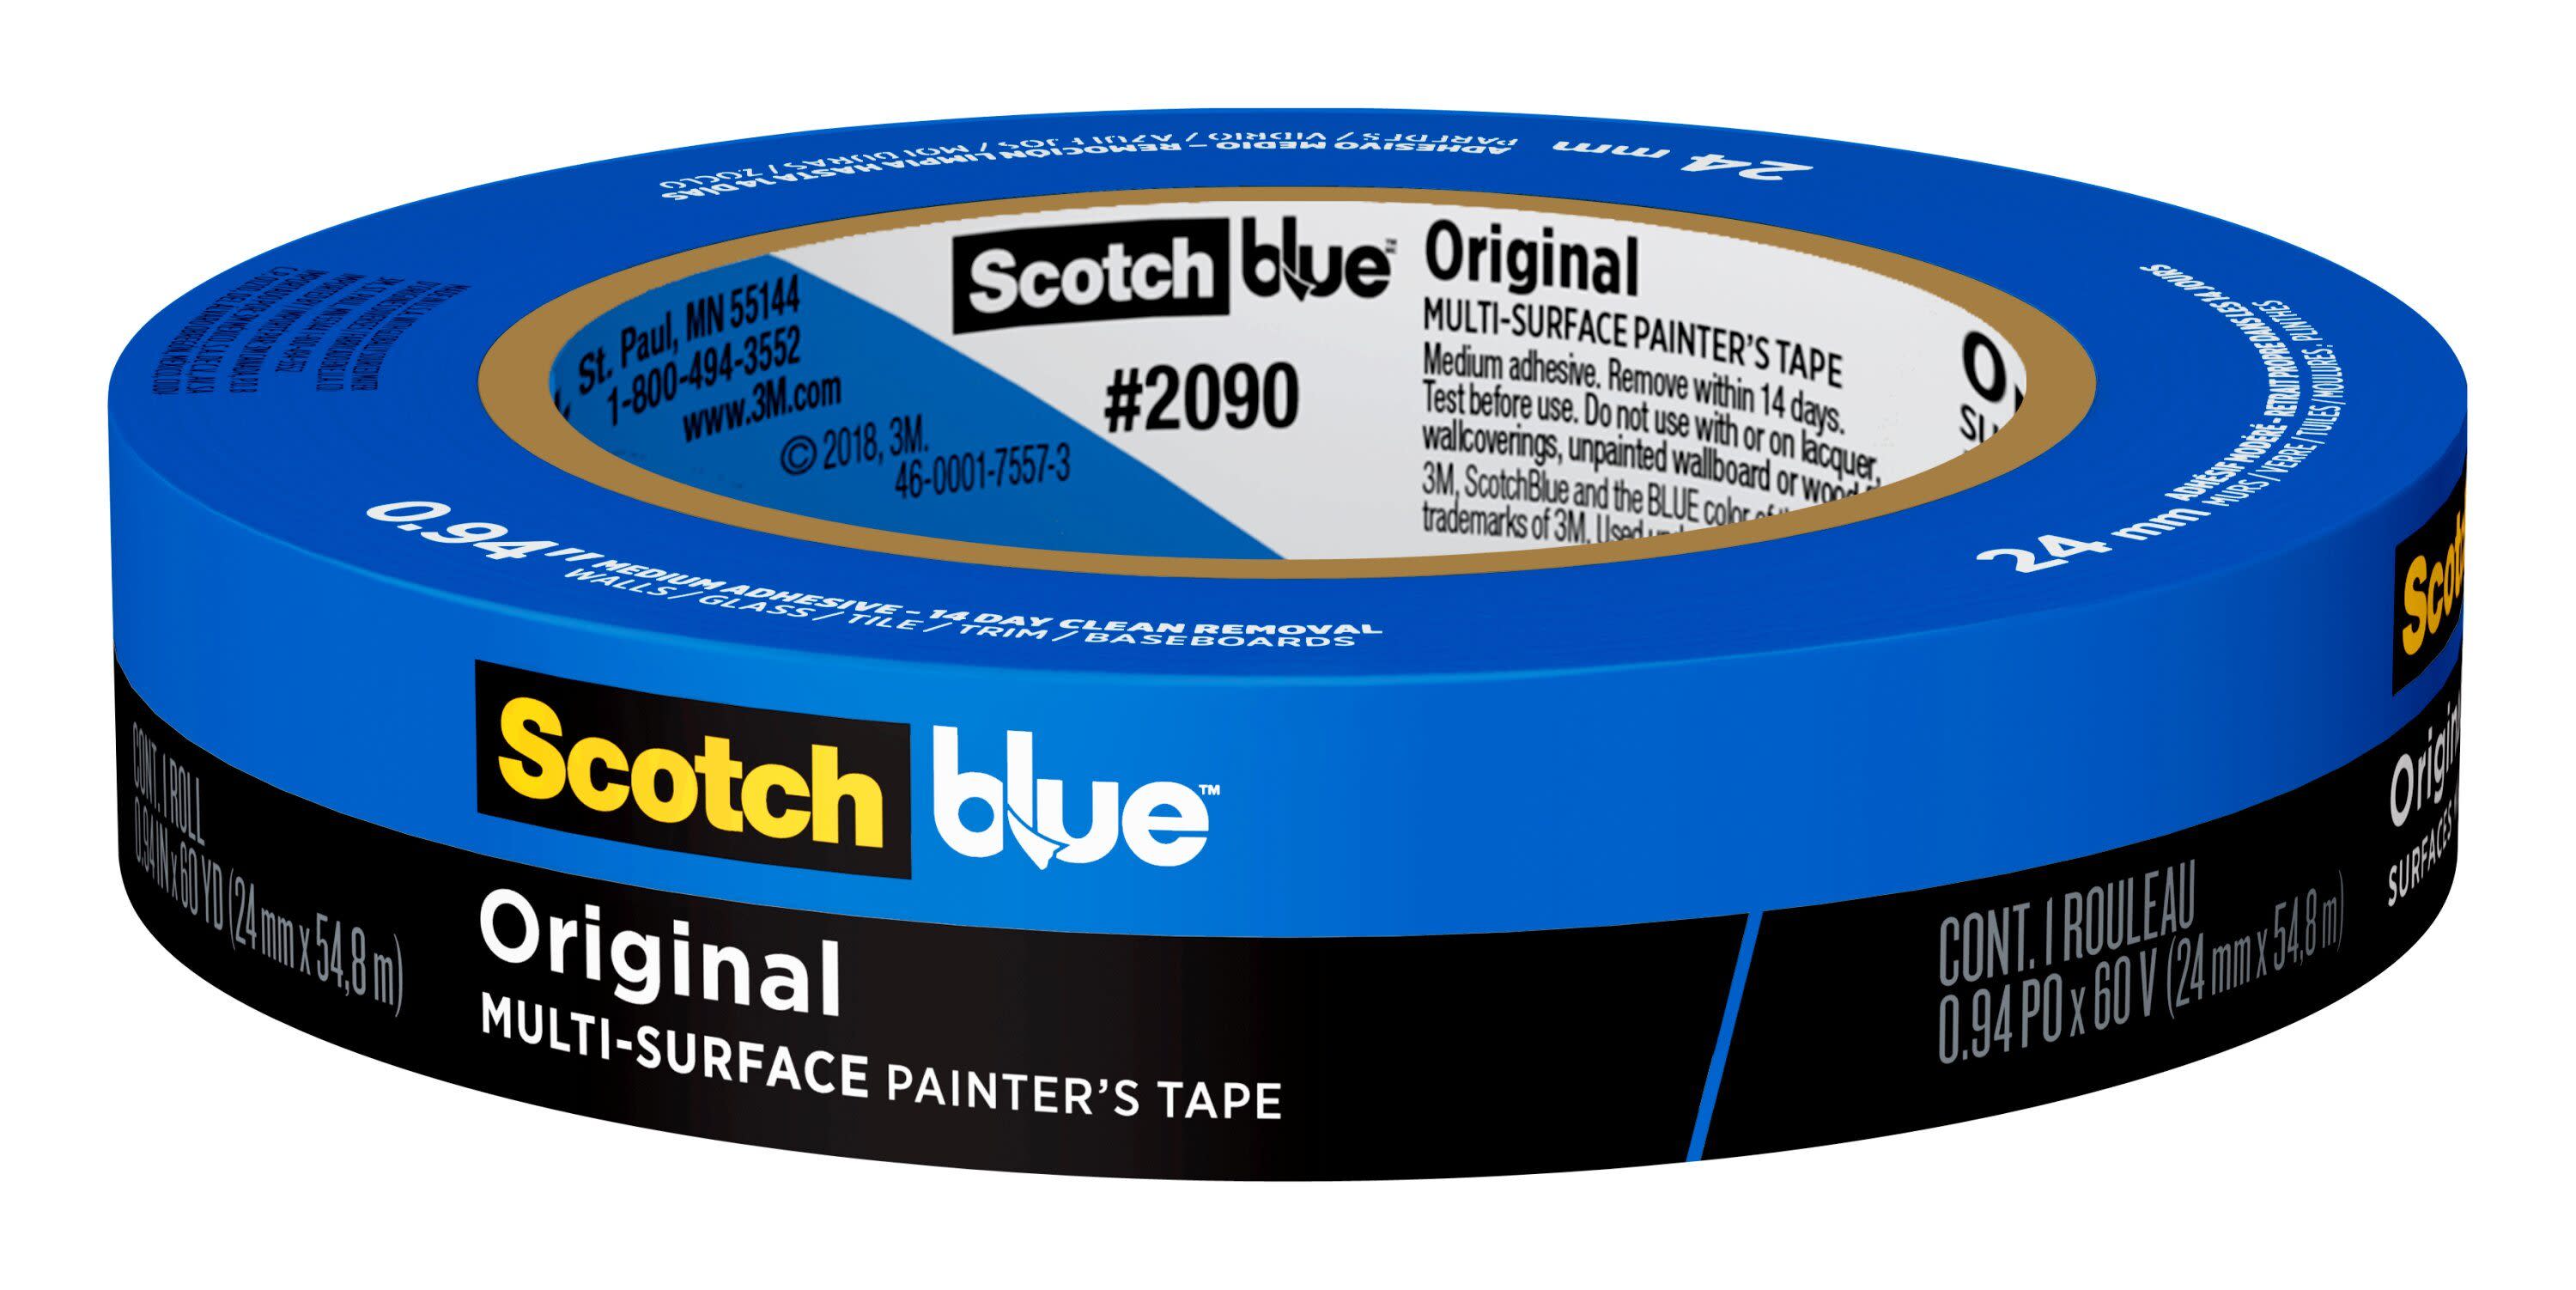 36 Rolls 0.94 Inch Blue Painters Tape Bulk Pack Medium Adhesive That Sticks Well but Leaves No Residue Behind 2160 Total Yards 36 Rolls 60 Yards Length 